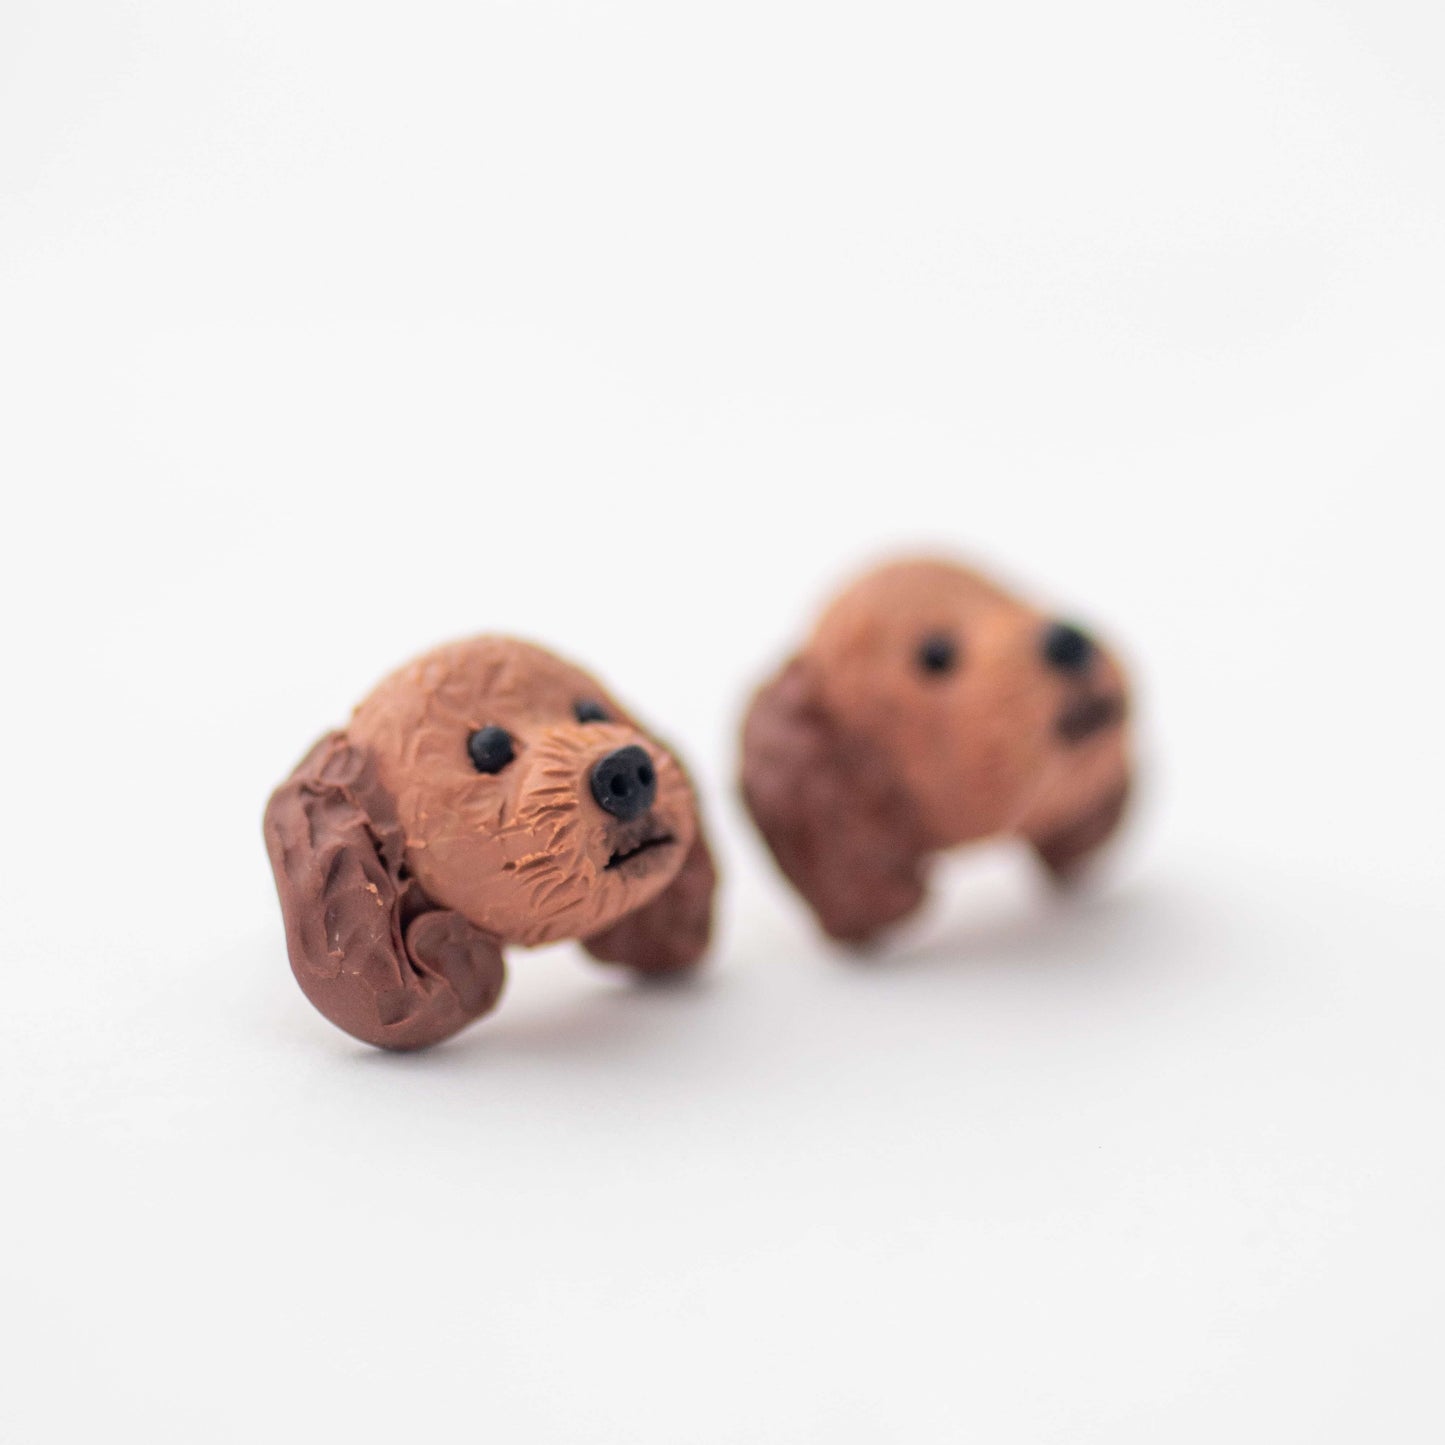 Handmade polymer clay Cavoodle stud earrings shown up close off cards